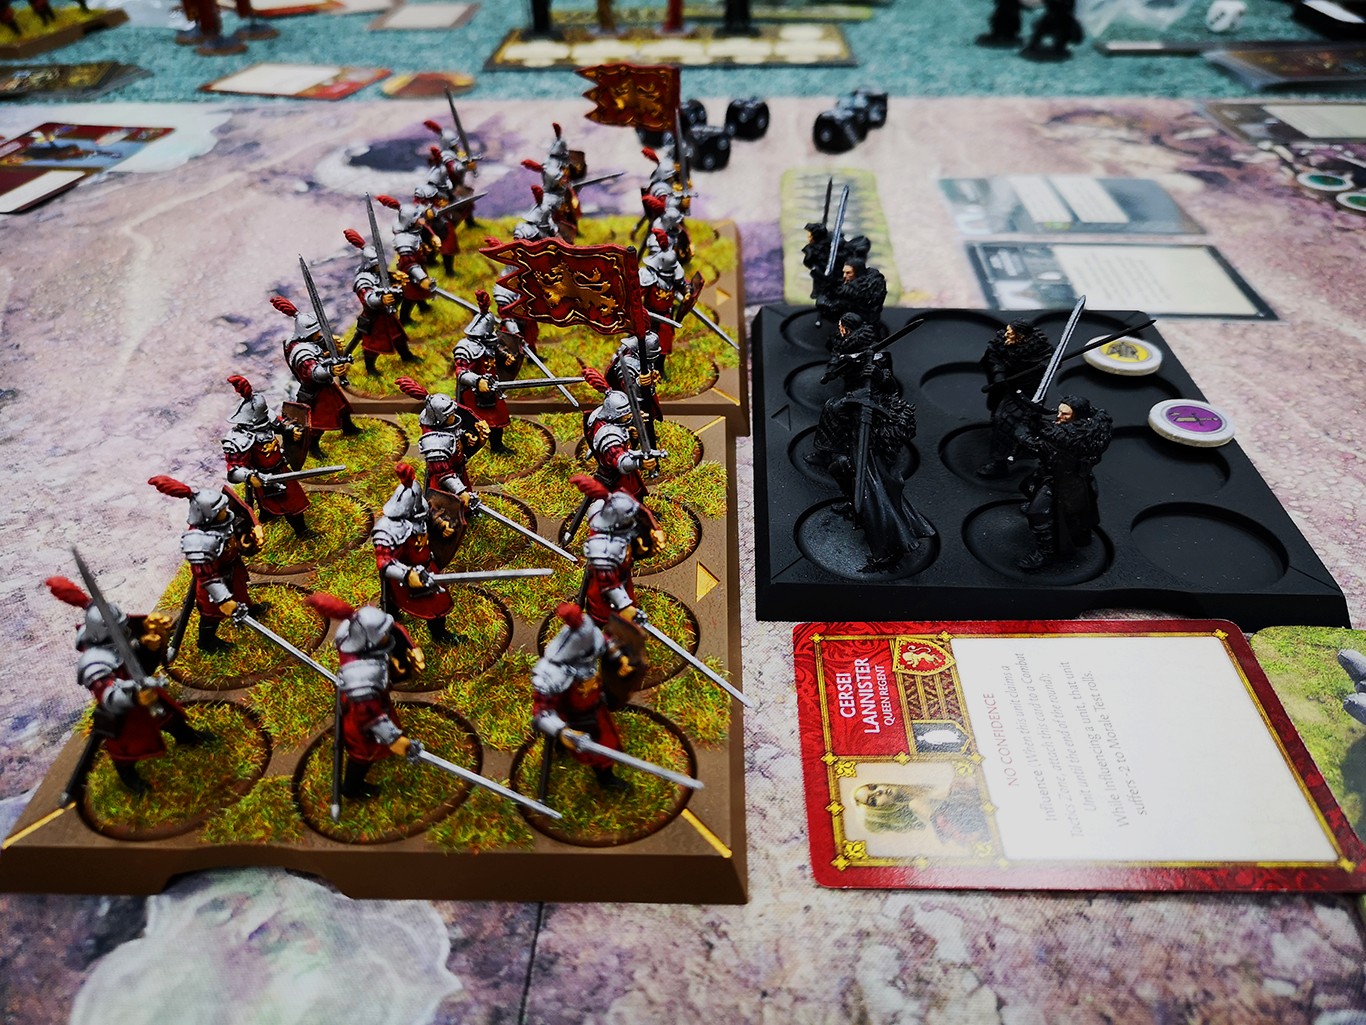 7 Game Of Thrones Board Games To Keep On Playing Even Past The Final Season | Geek Culture